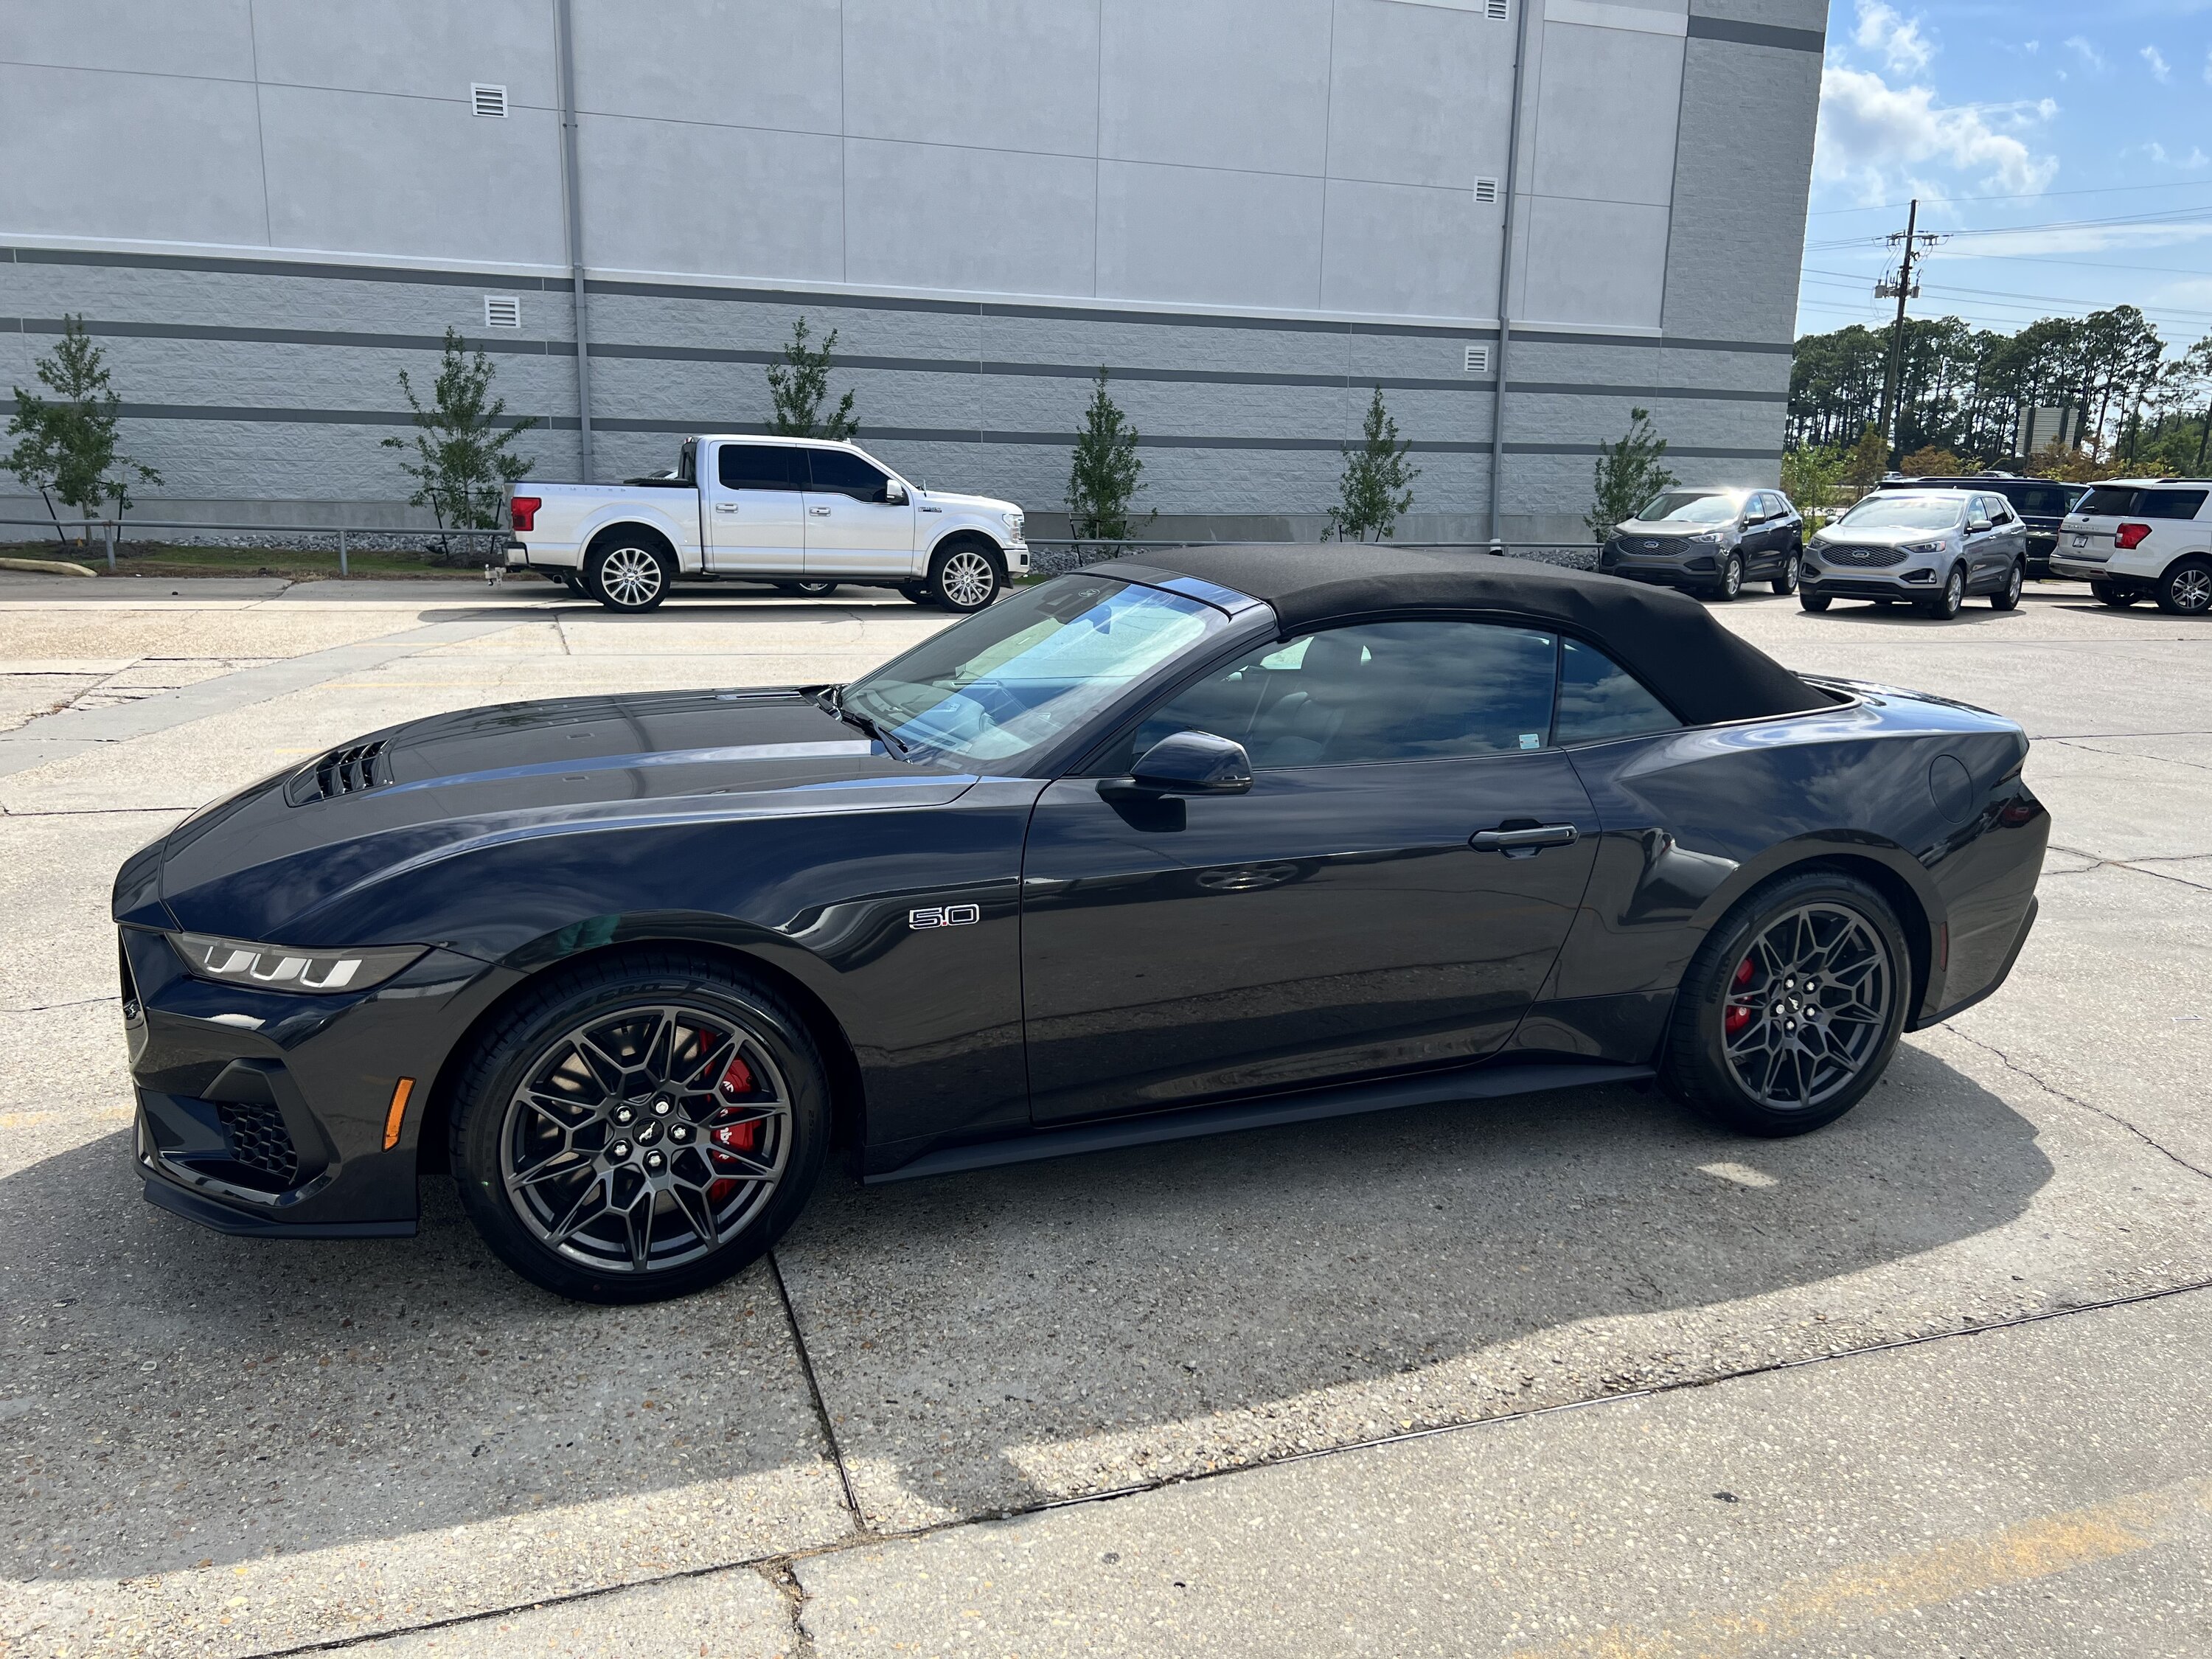 S650 Mustang Dark Matter Gray Convertible delivered IMG_5946